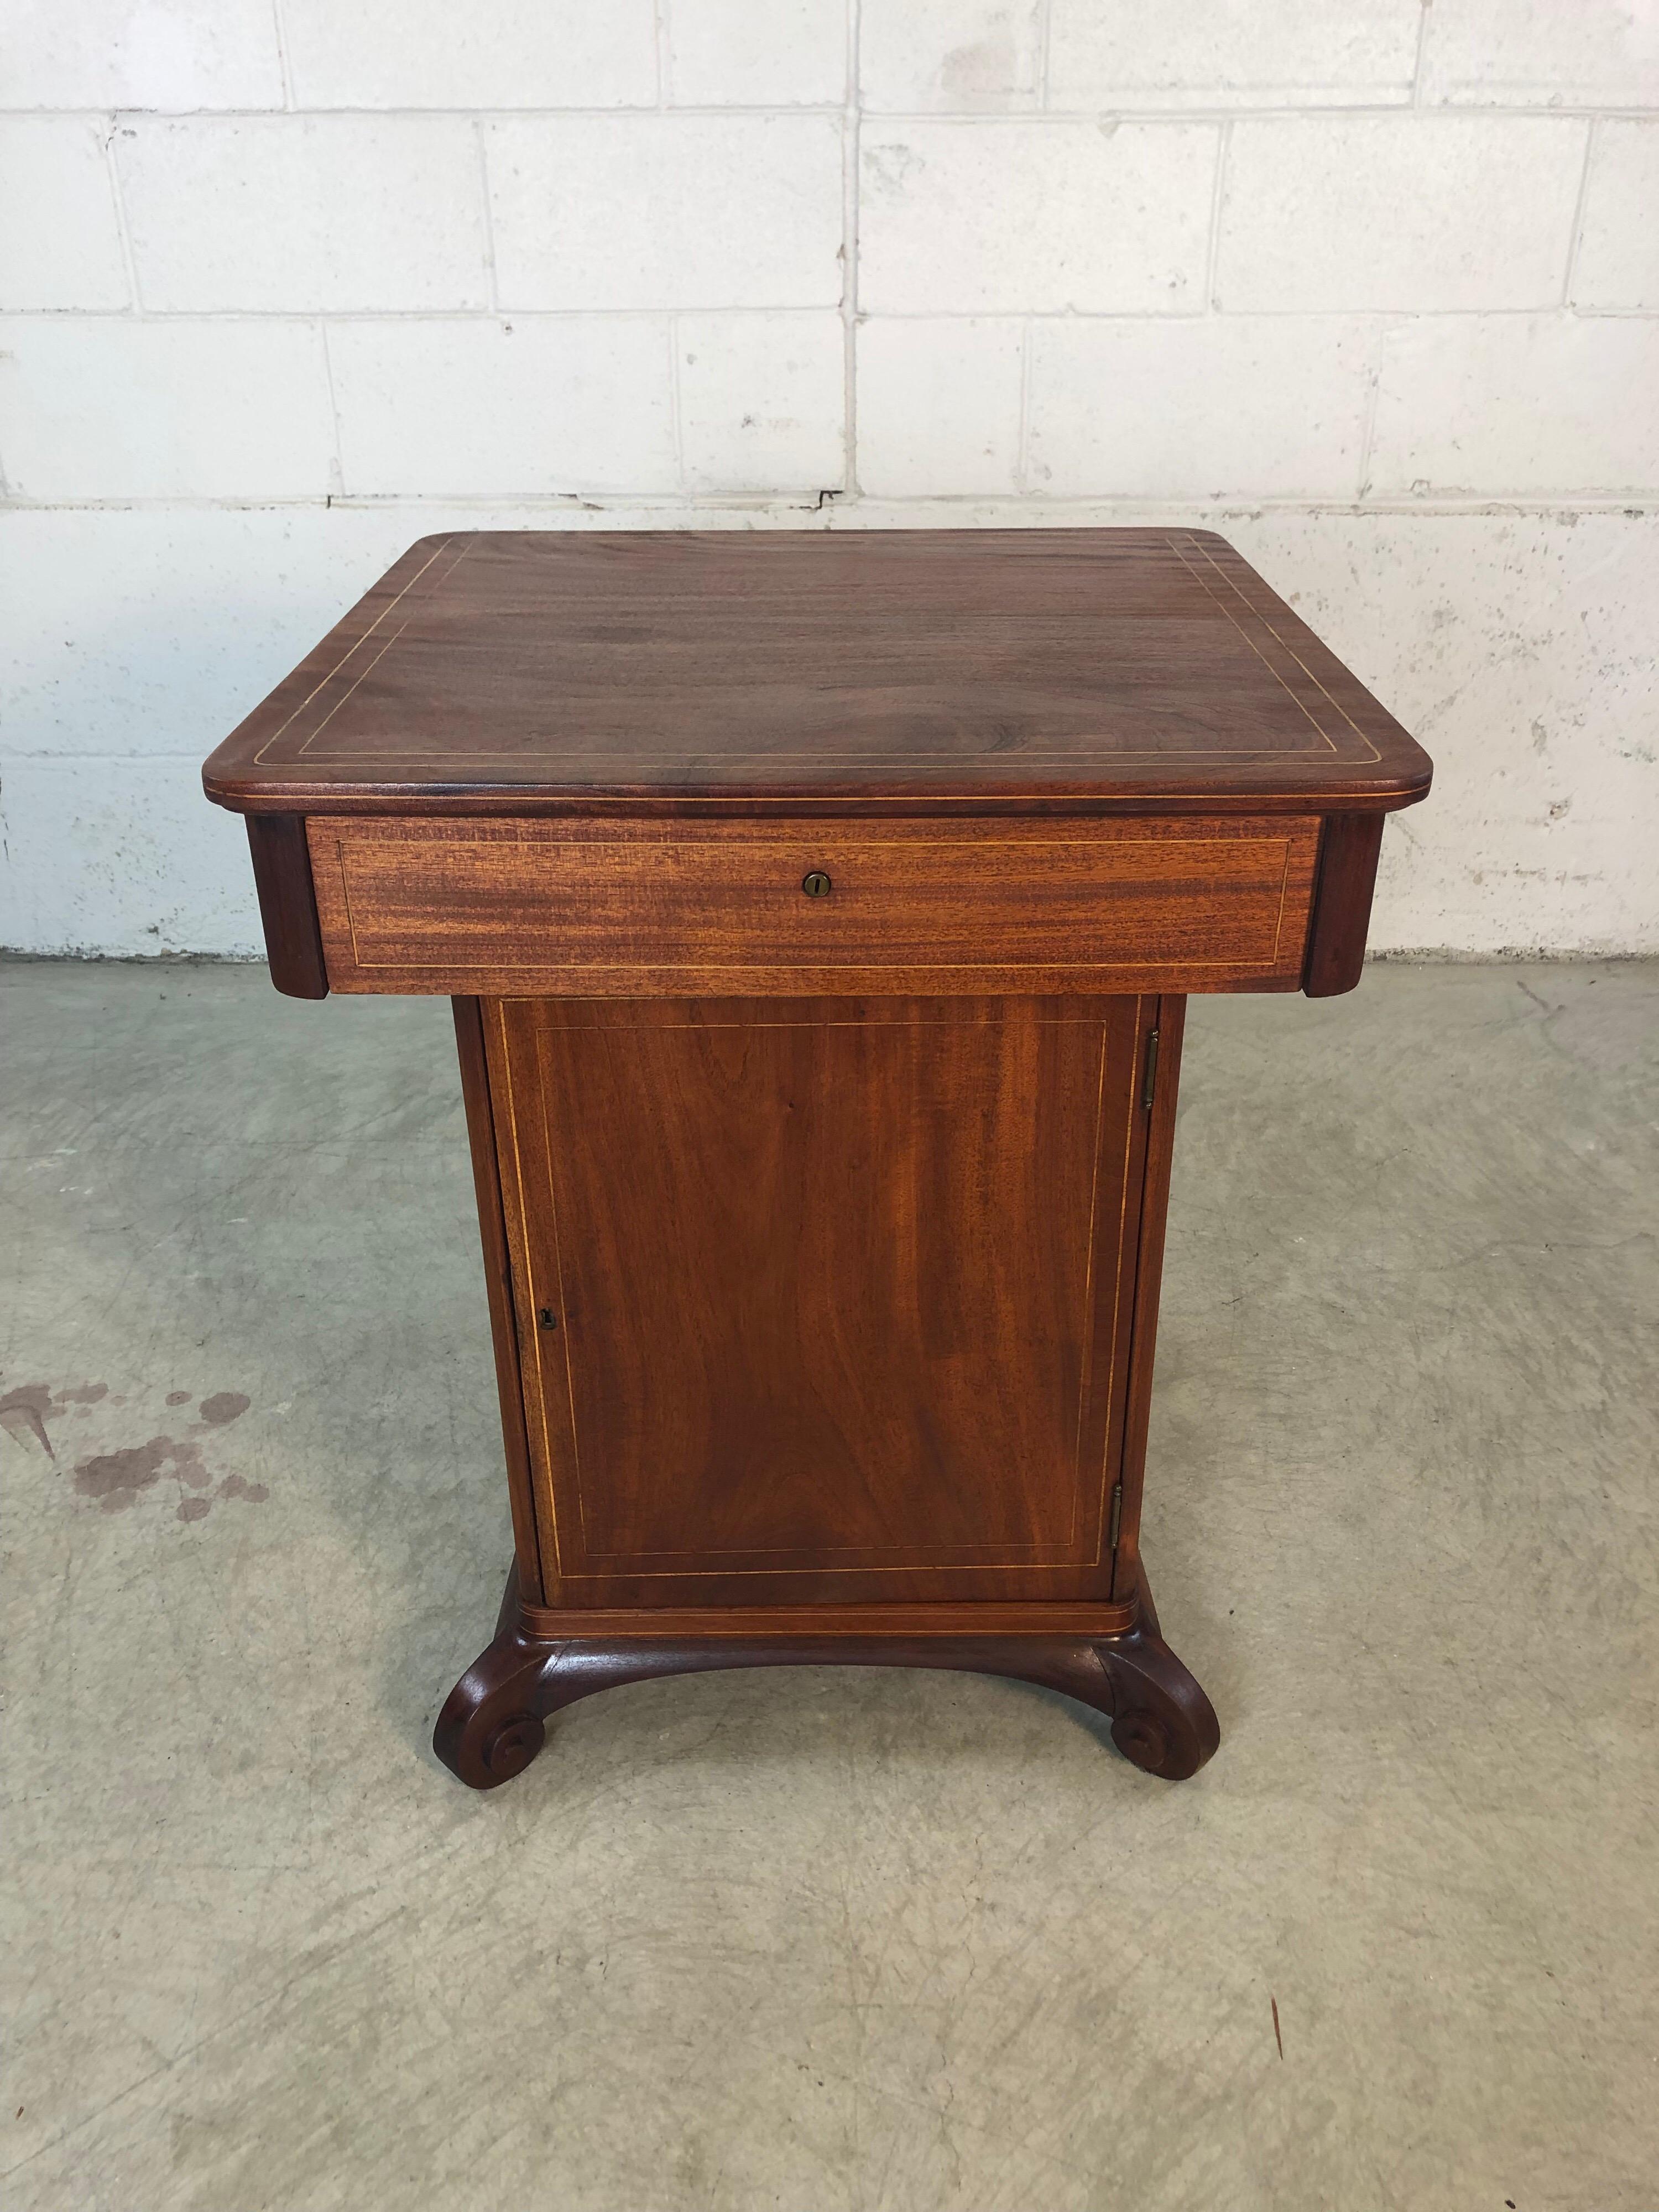 Vintage 1930s mahogany smoking humidor table with light maple wood inlay. The feet are hand carved. The stand has a drawer for storage and is able to hold all of the smoking accessories in the center holder. The stand is newly refinished and in